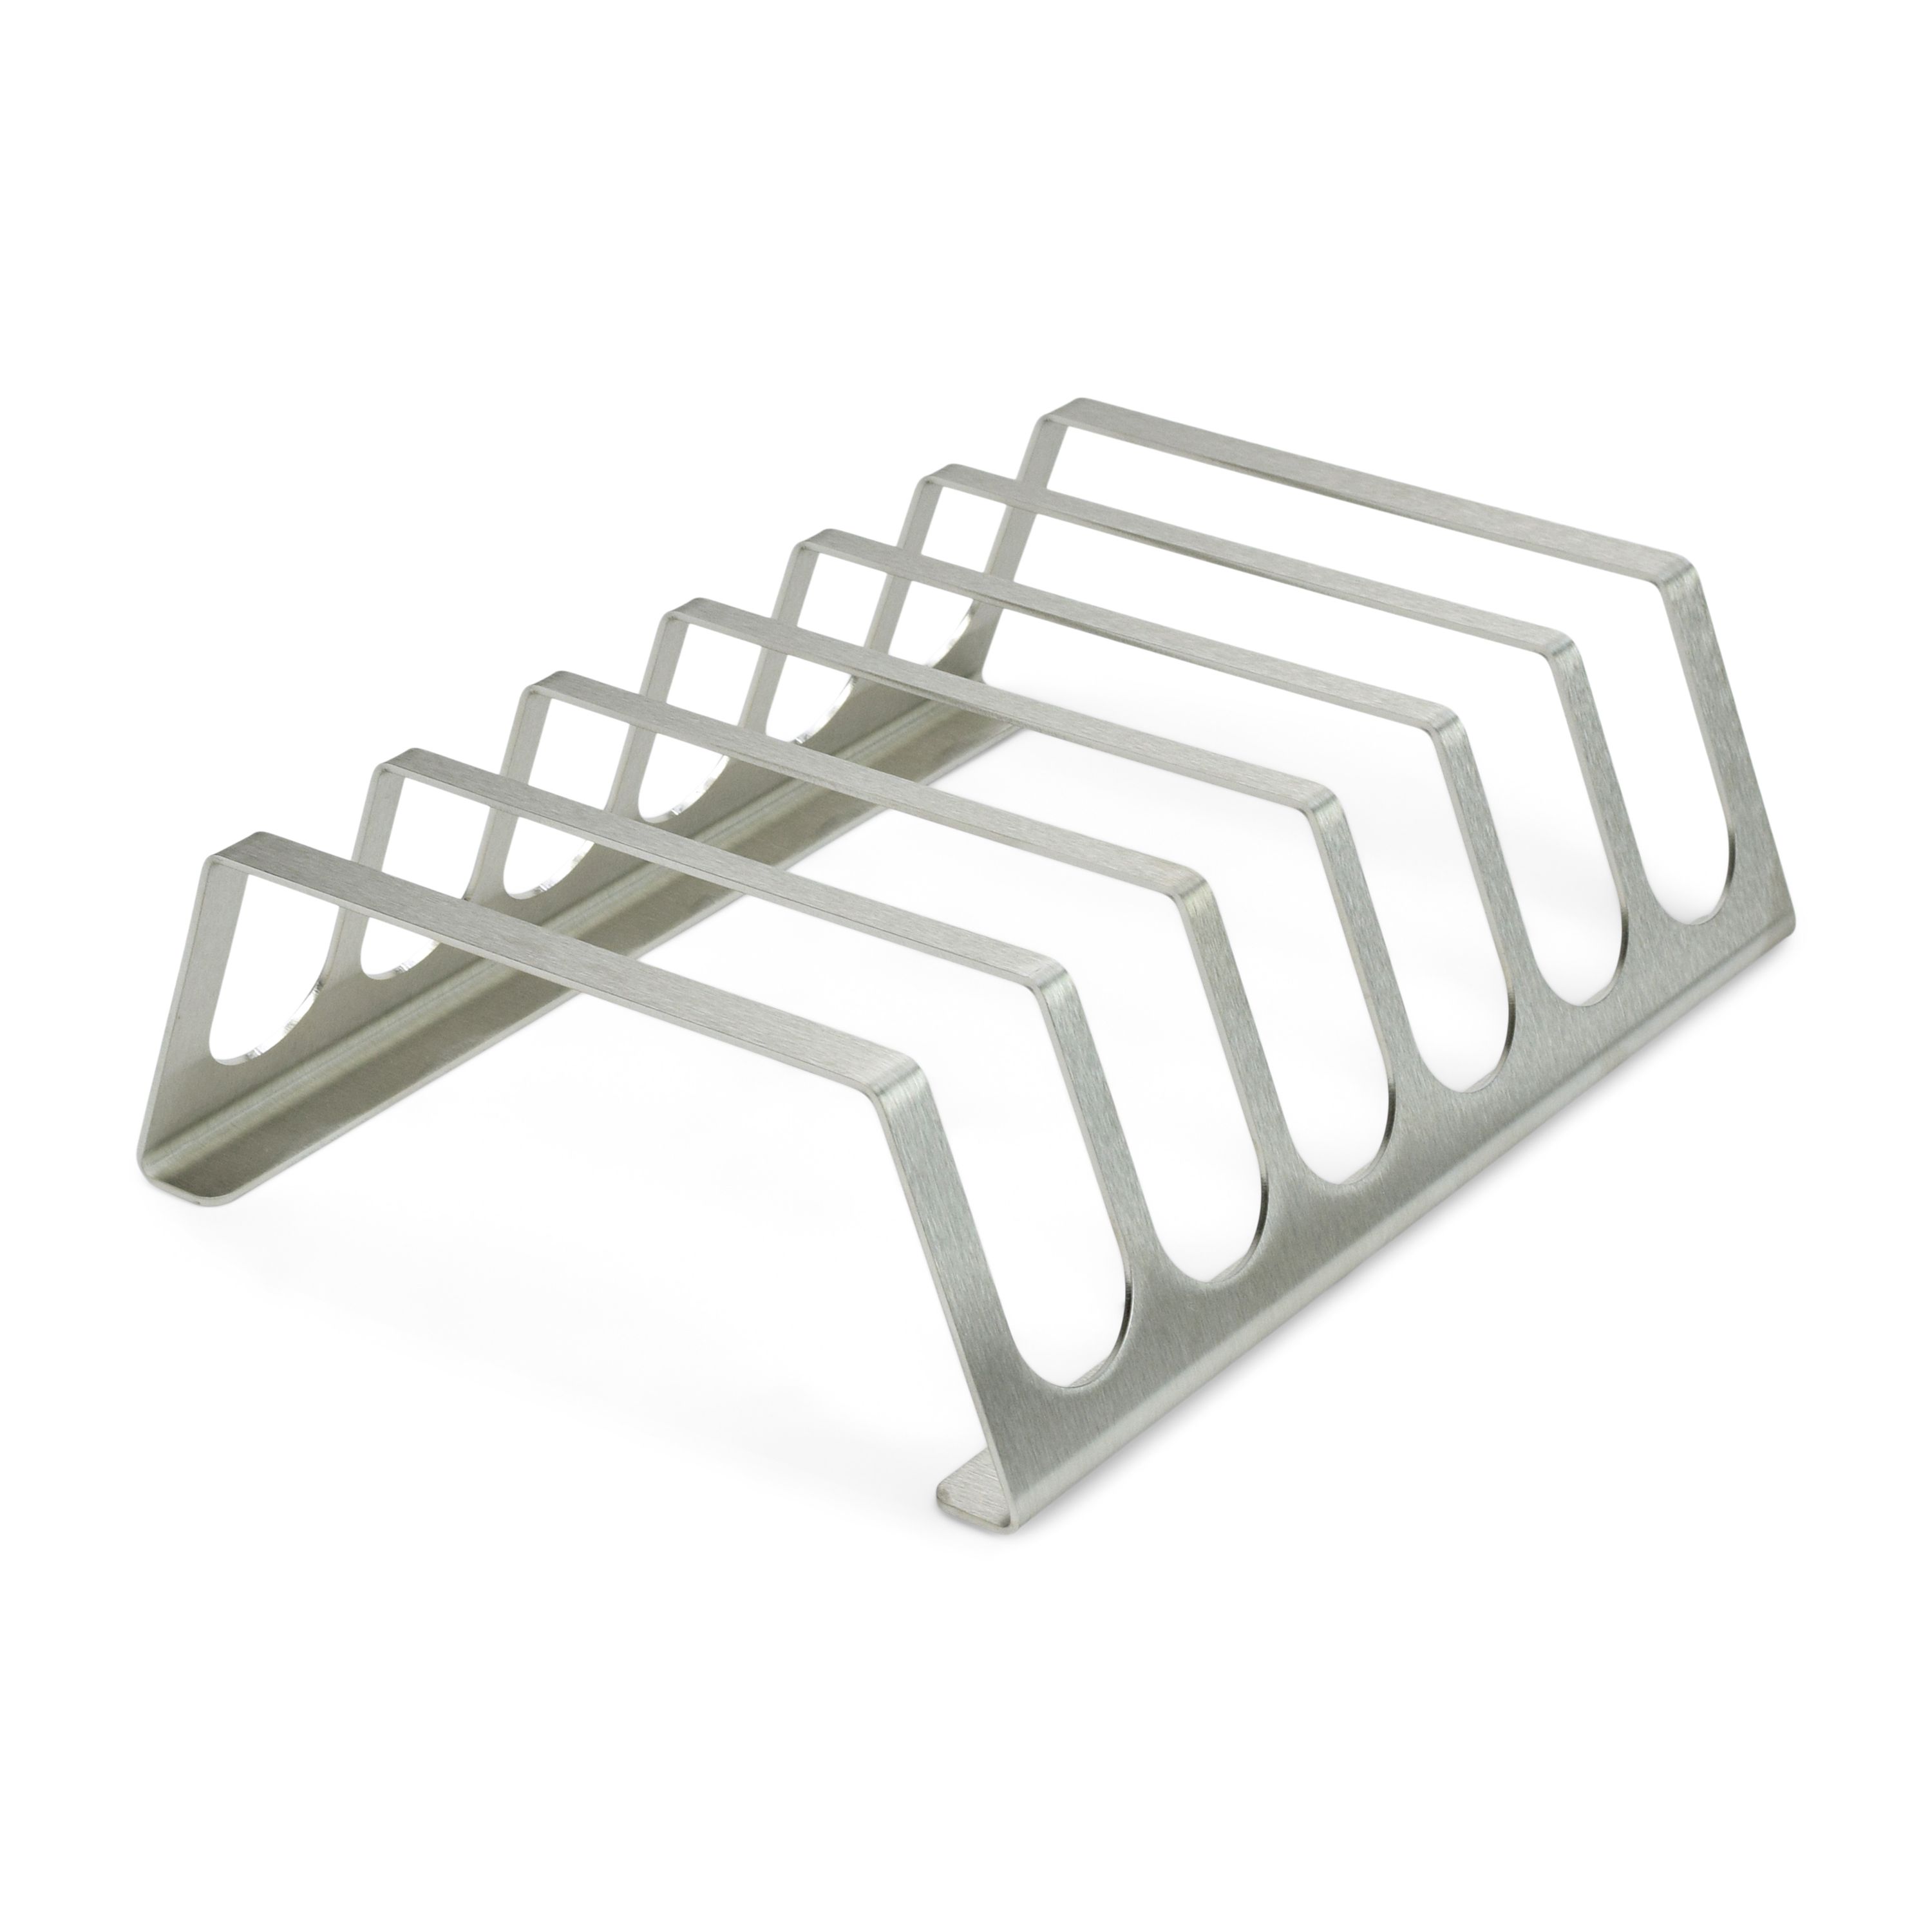 Stainless steel spare rib holder